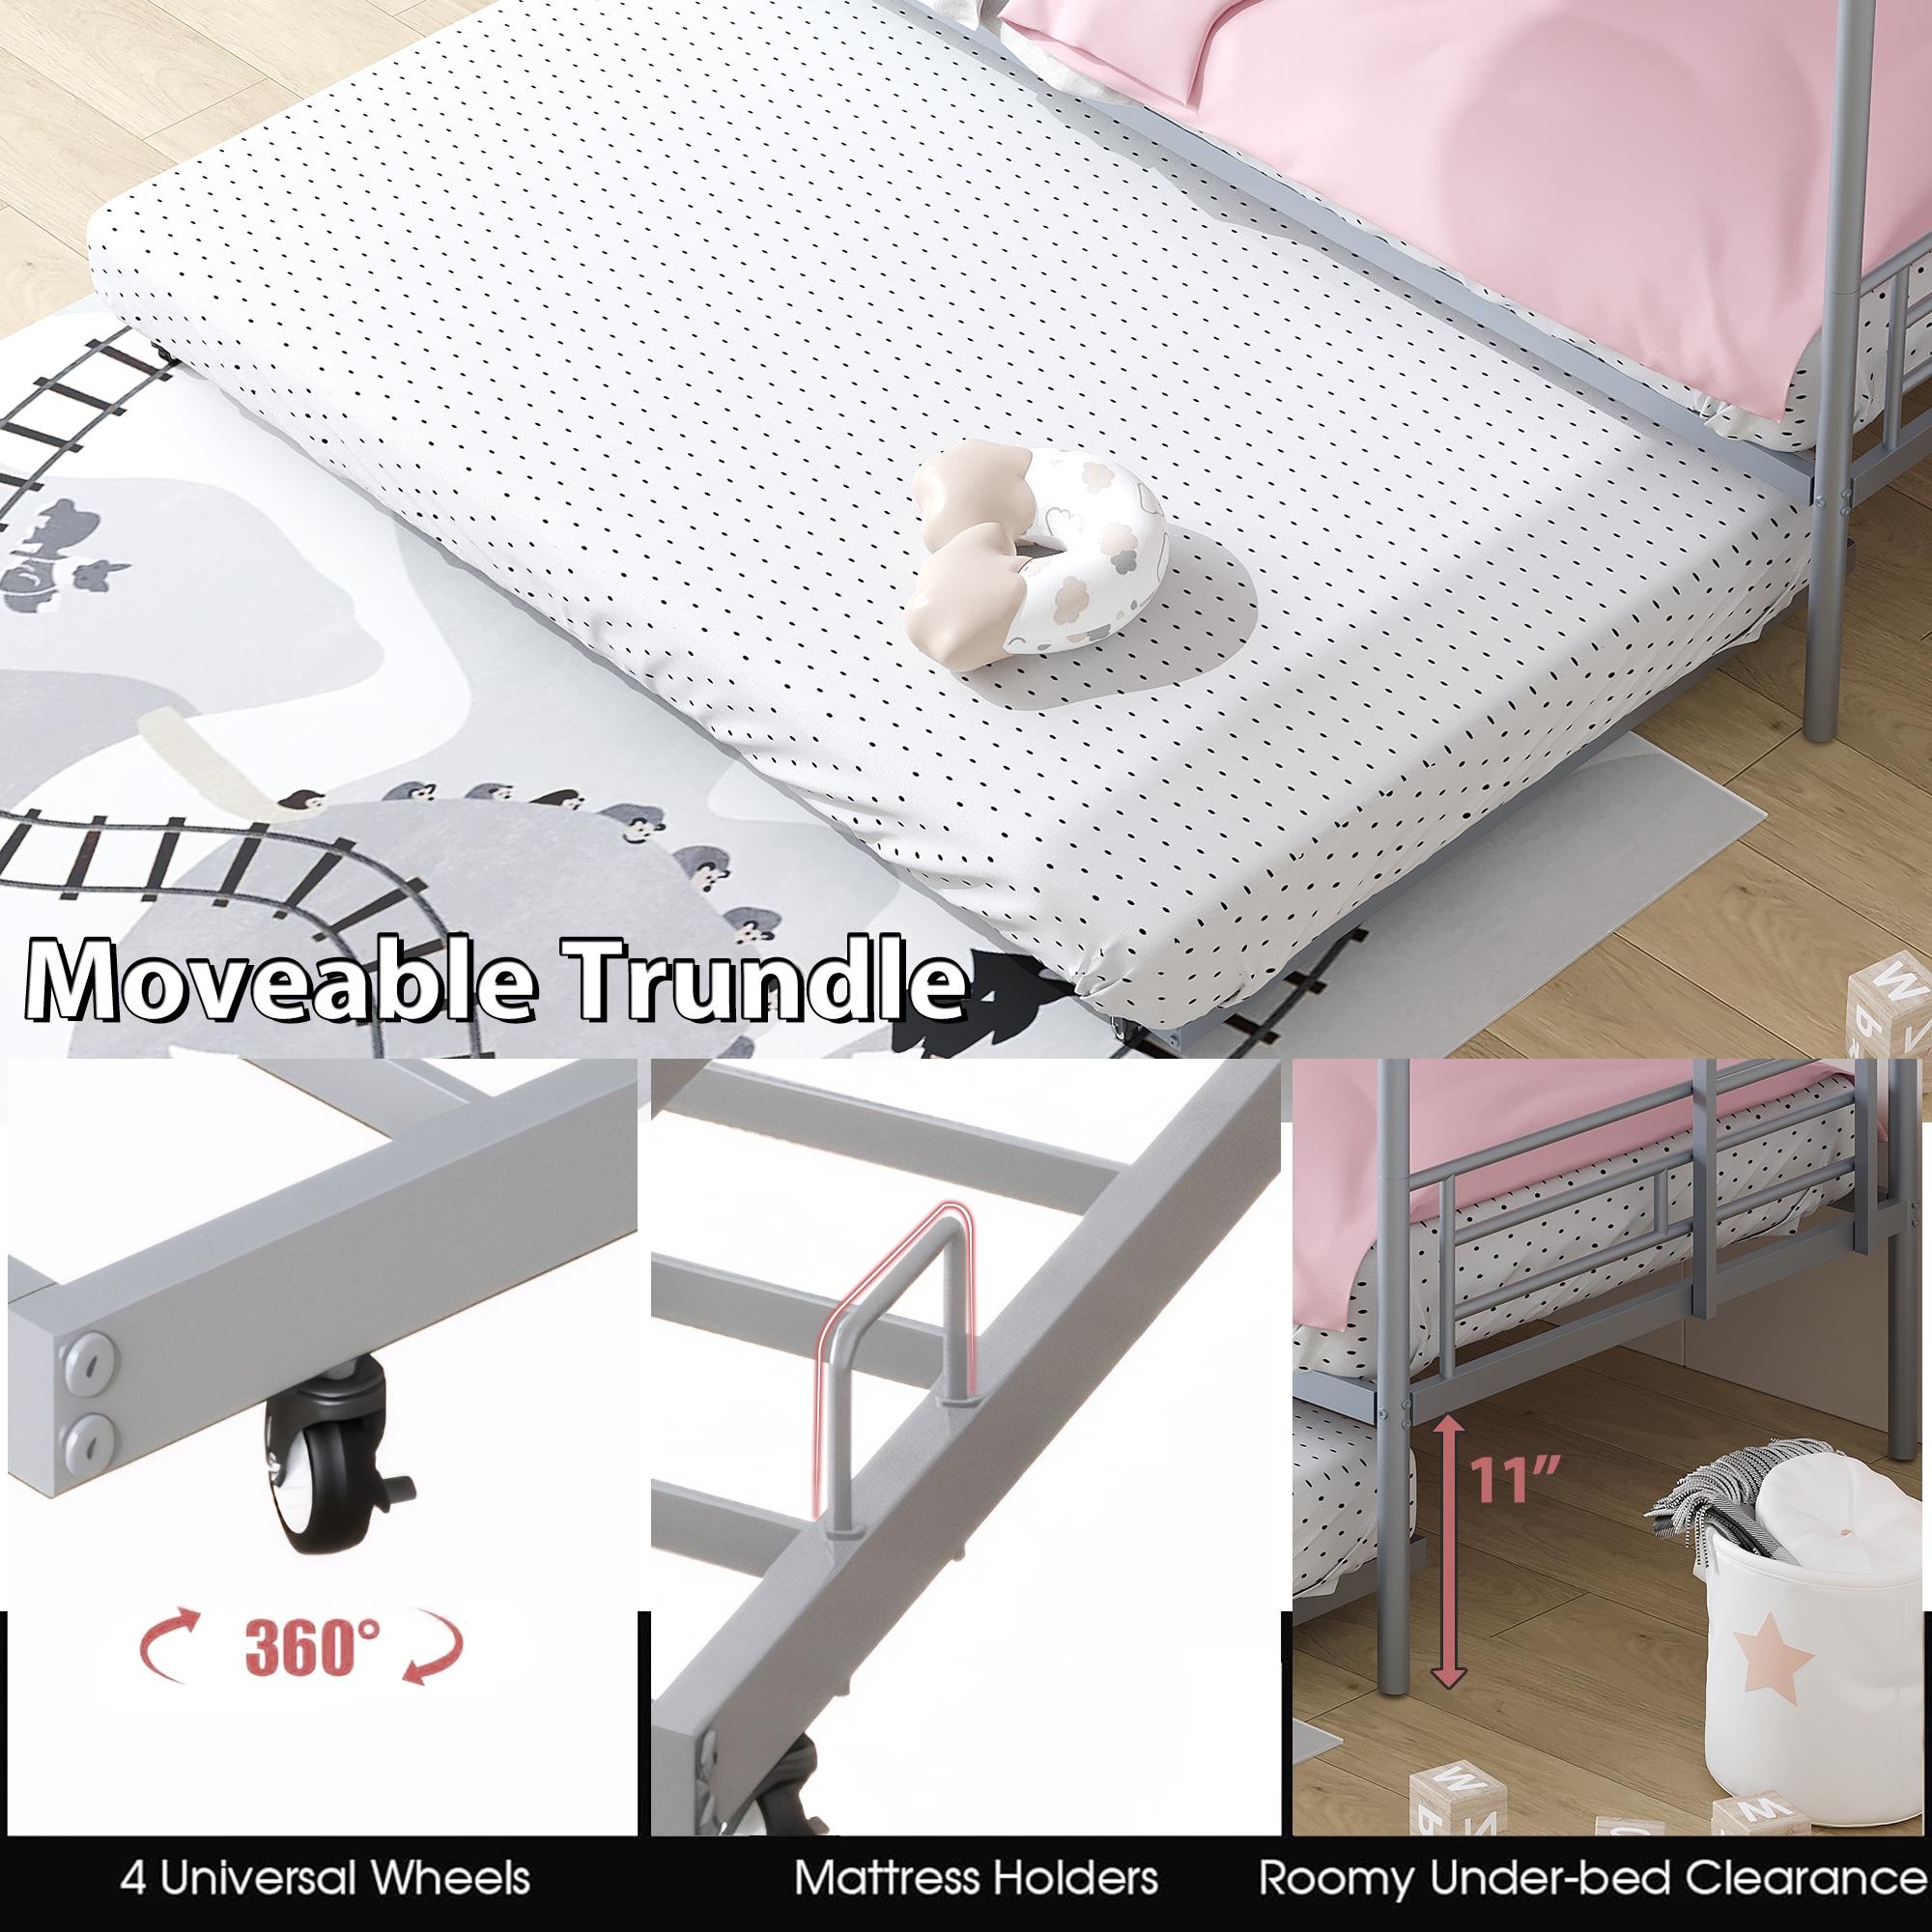 uhomepro Metal Twin Over Twin Bunk Beds with Trundle Bed, Twin Bunk Beds for Kids Adults Teens, Bunk Bed Can Be Divided Into 2 Twin Beds with Trundle, 2 Ladders, No Box Spring Need, Silver - image 5 of 13